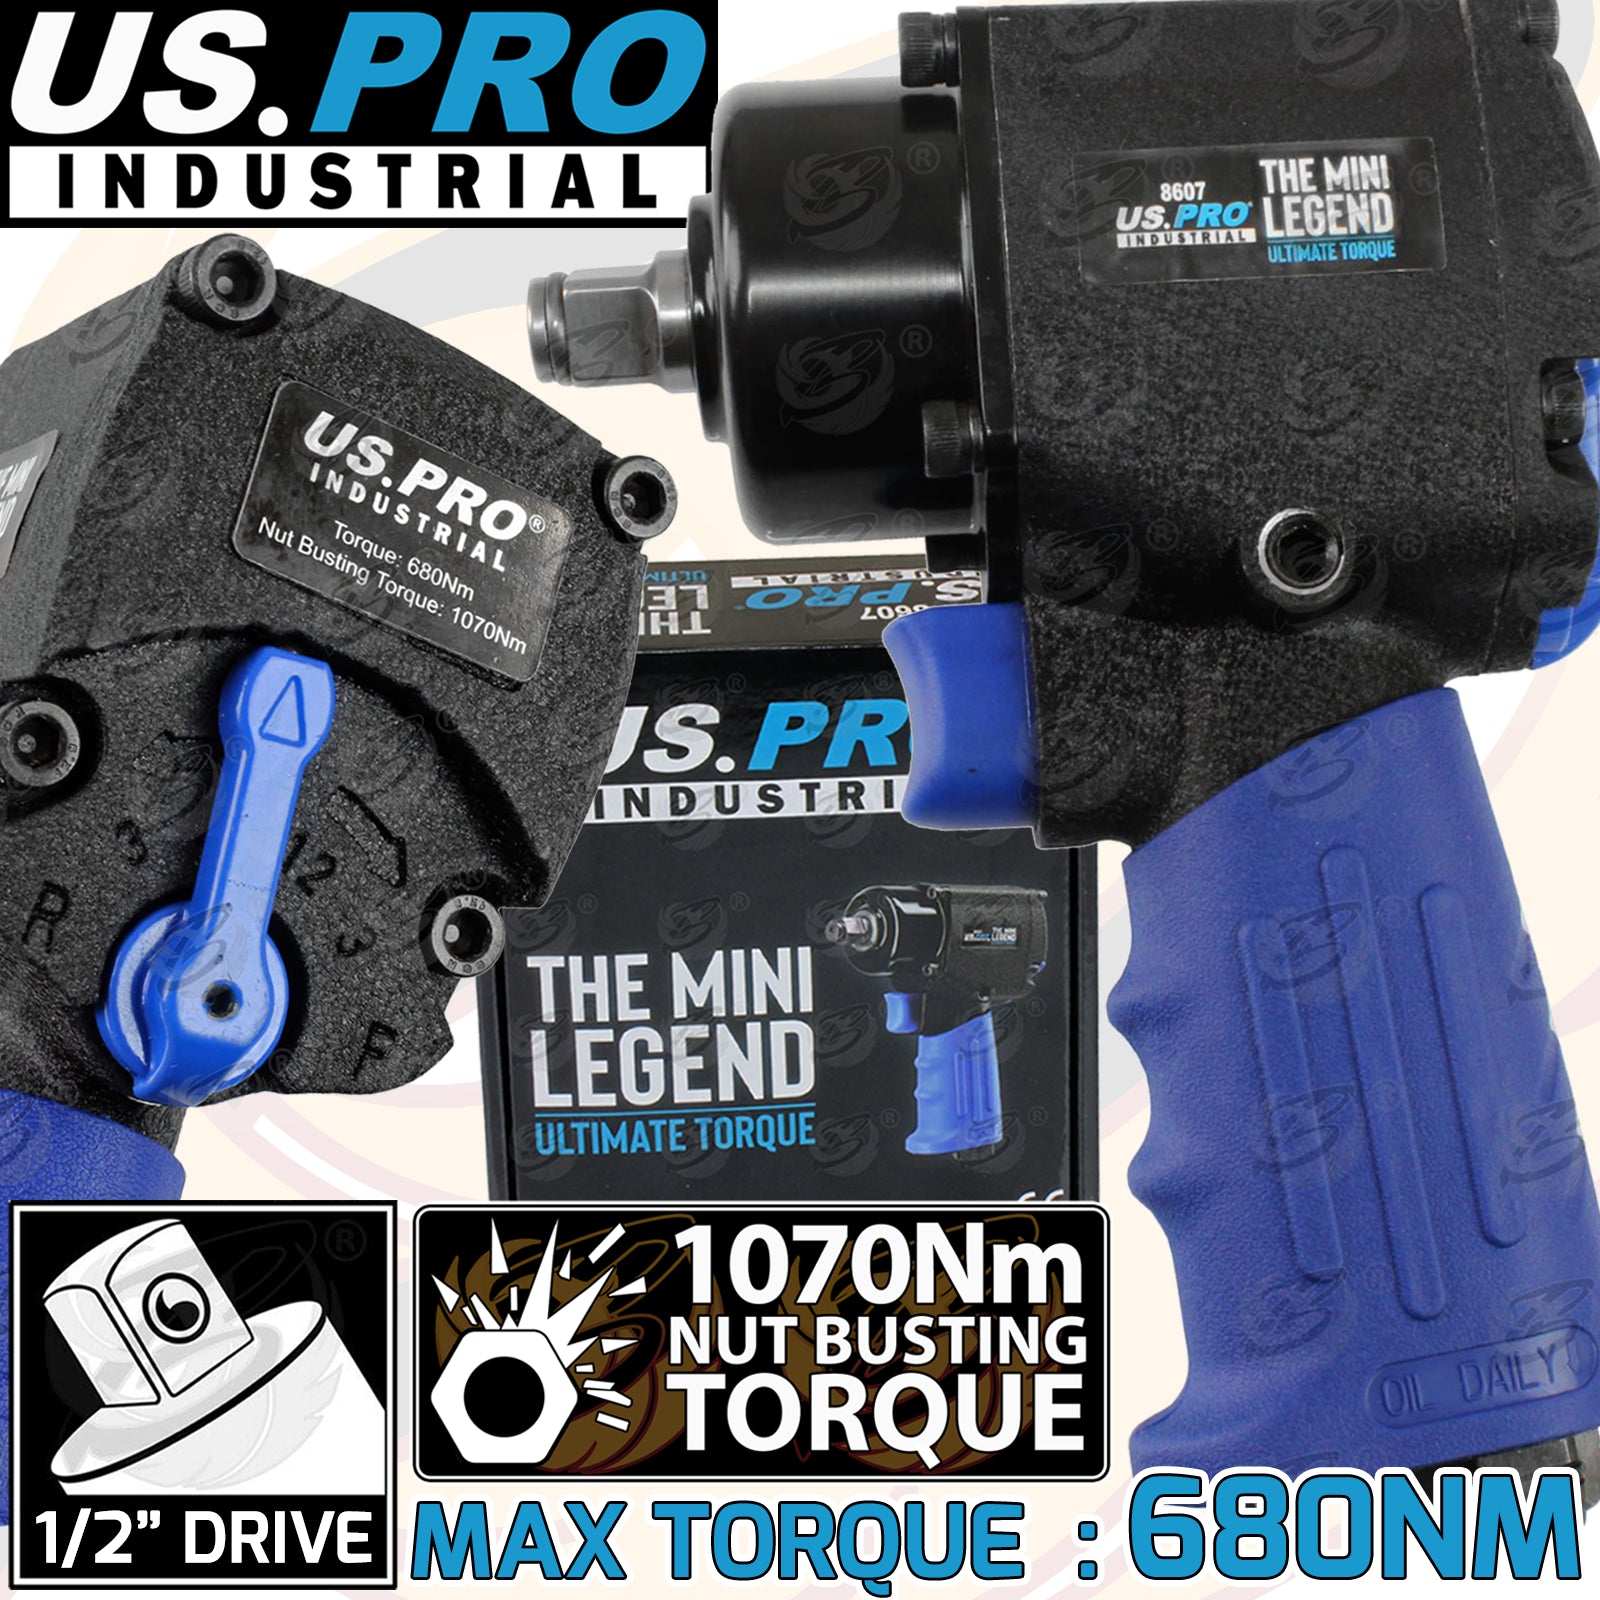 US PRO 1/2" DRIVE COMPACT AIR IMPACT WRENCH 1070Nm ( THE MINI LEGEND )